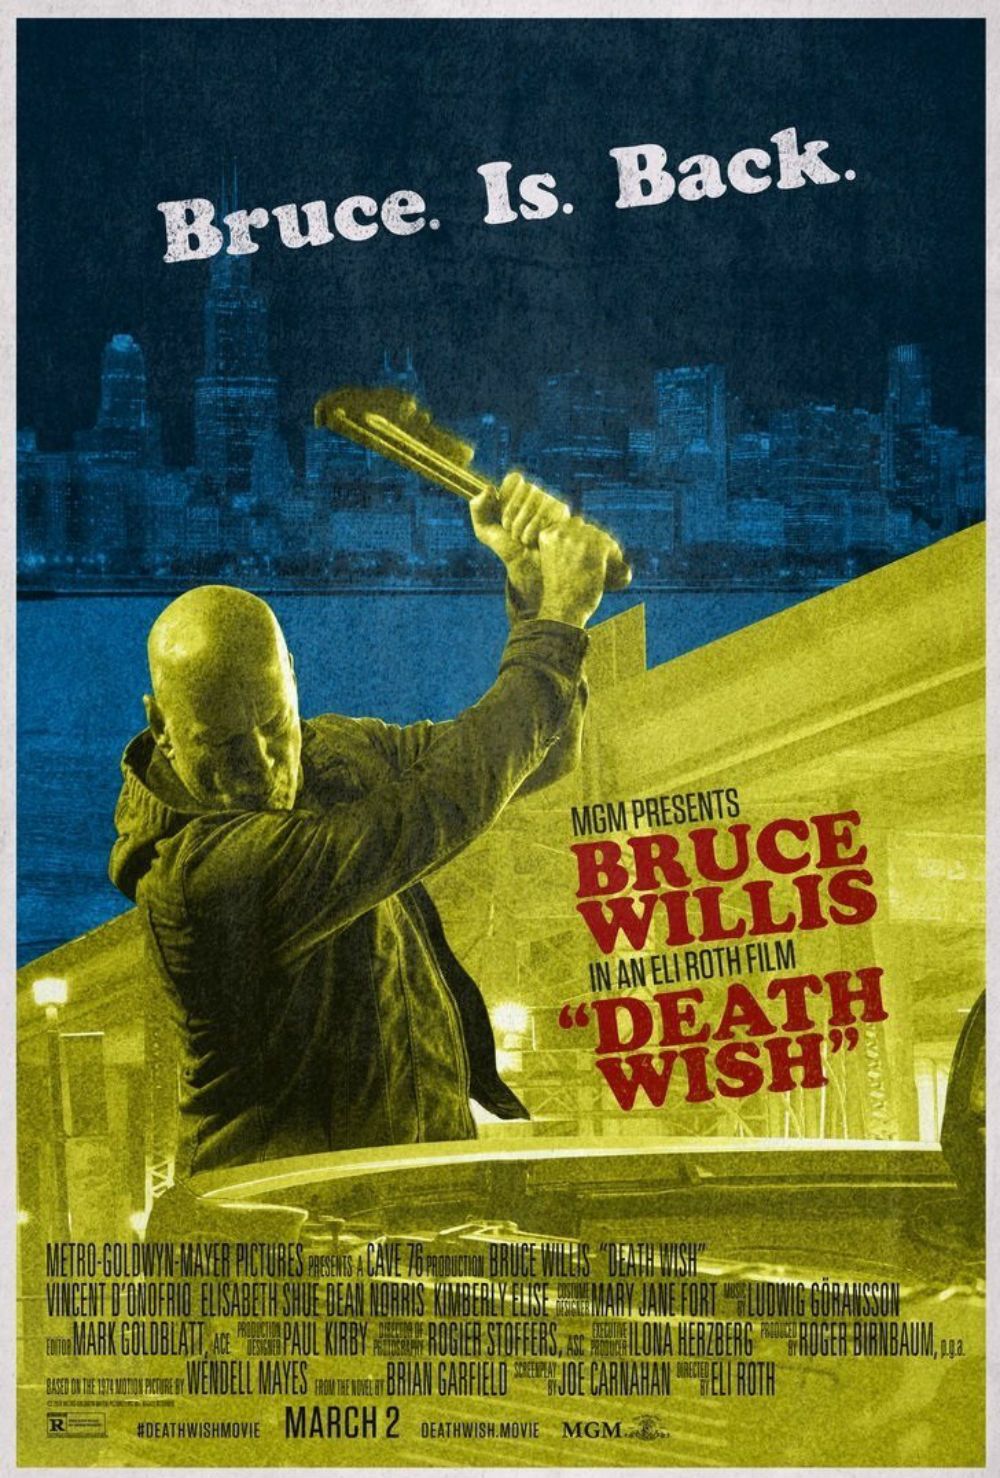 Death Wish Retro Poster Claims Bruce Willis Is Back